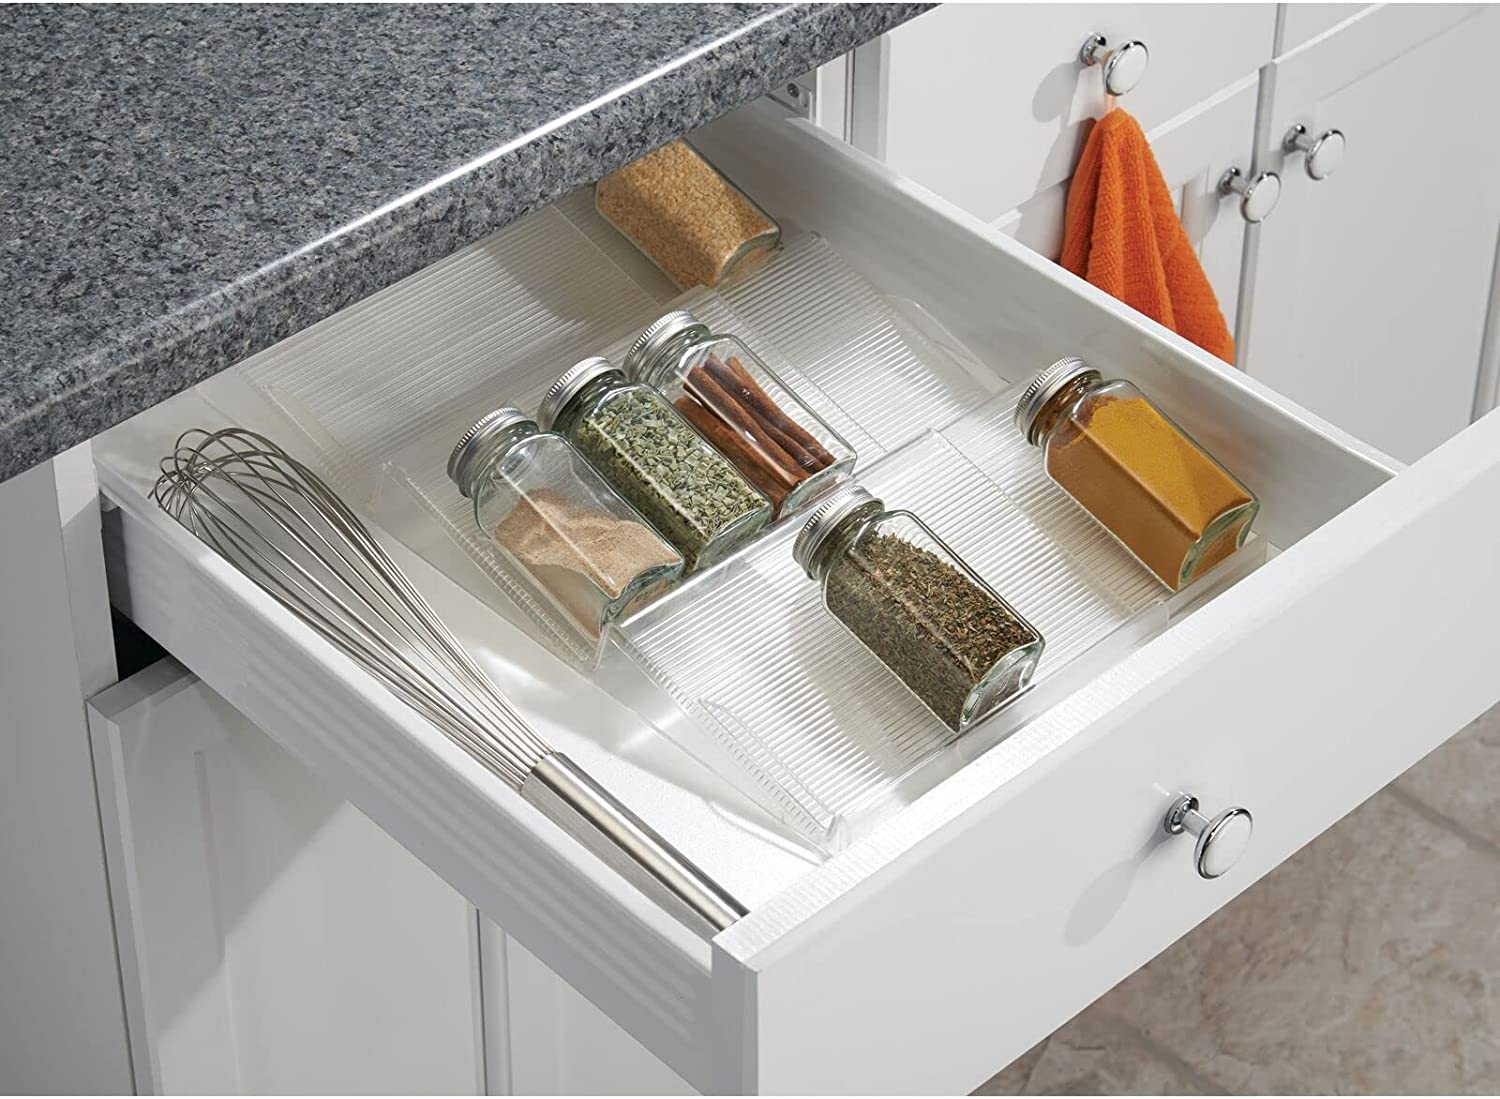 mDesign Pull Out 3-Tier Spice Organiser for Stress-Free Kitchen Clutter Control - Transparent Storage for Spice Jars and Packets 6